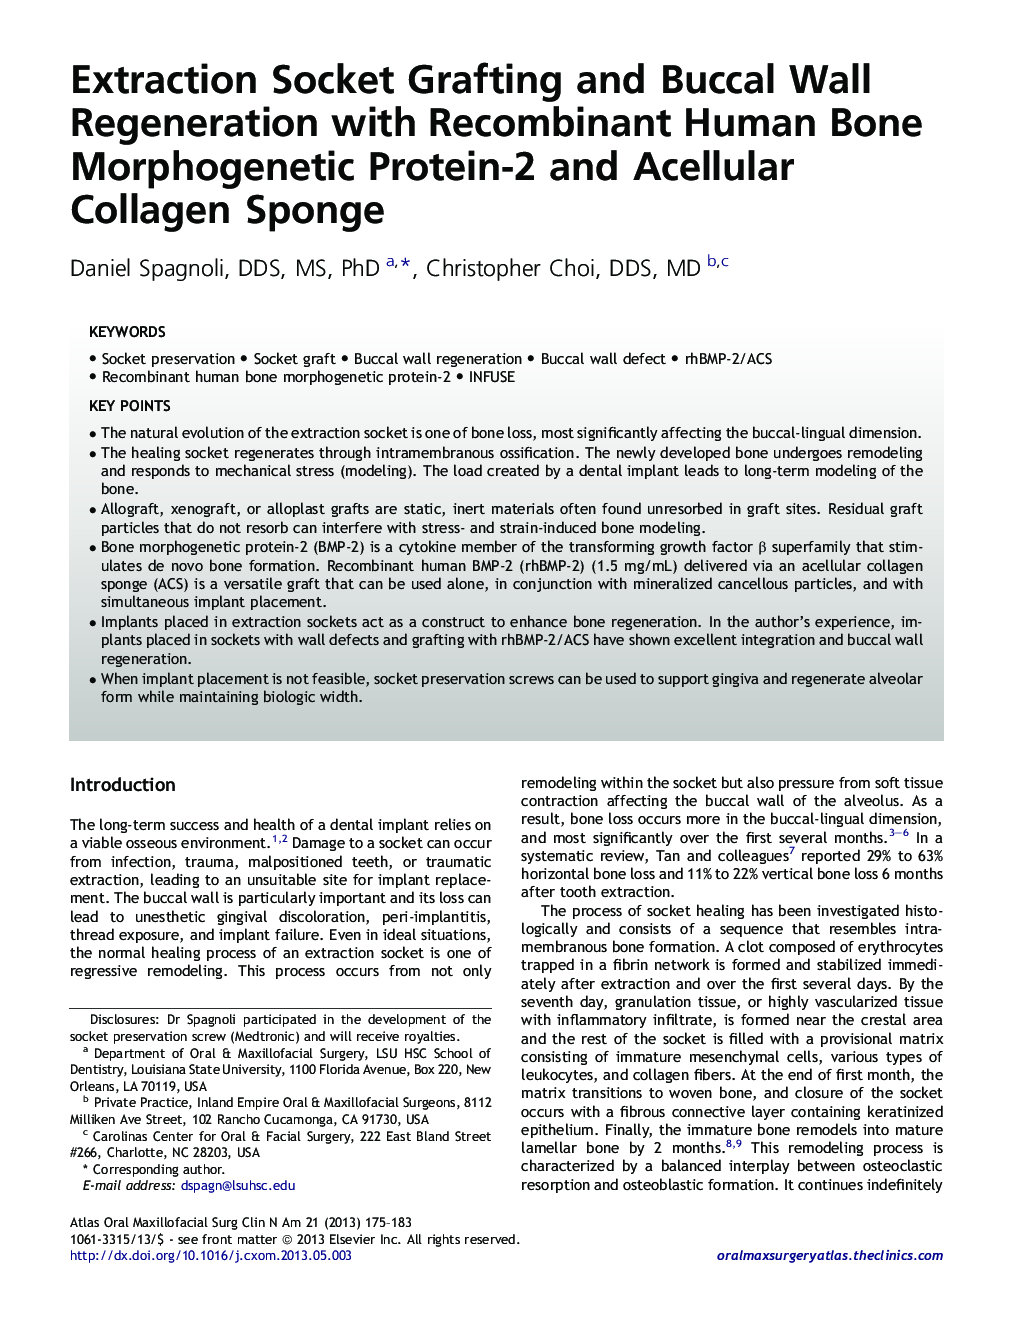 Extraction Socket Grafting and Buccal Wall Regeneration with Recombinant Human Bone Morphogenetic Protein-2 and Acellular Collagen Sponge